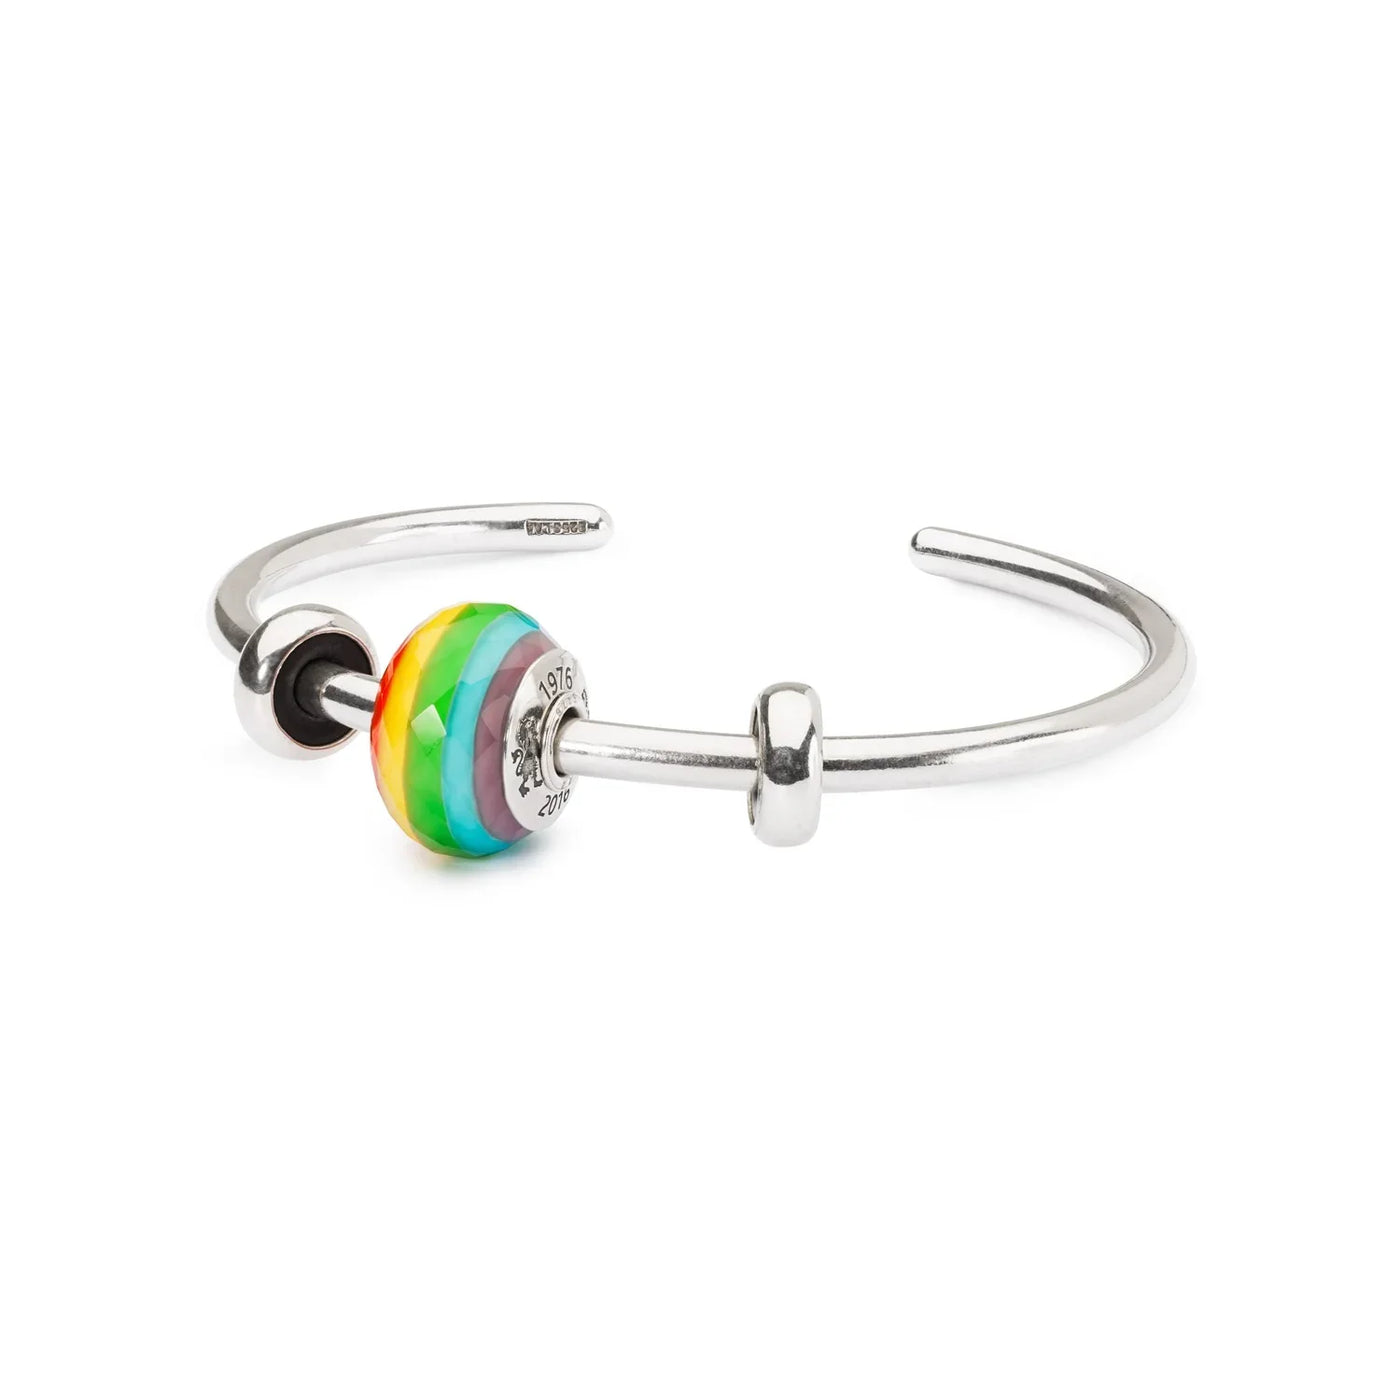 People's Bead winner 2016: Celebrate Life. Glass bead with rainbow colours on a silver bangle. 